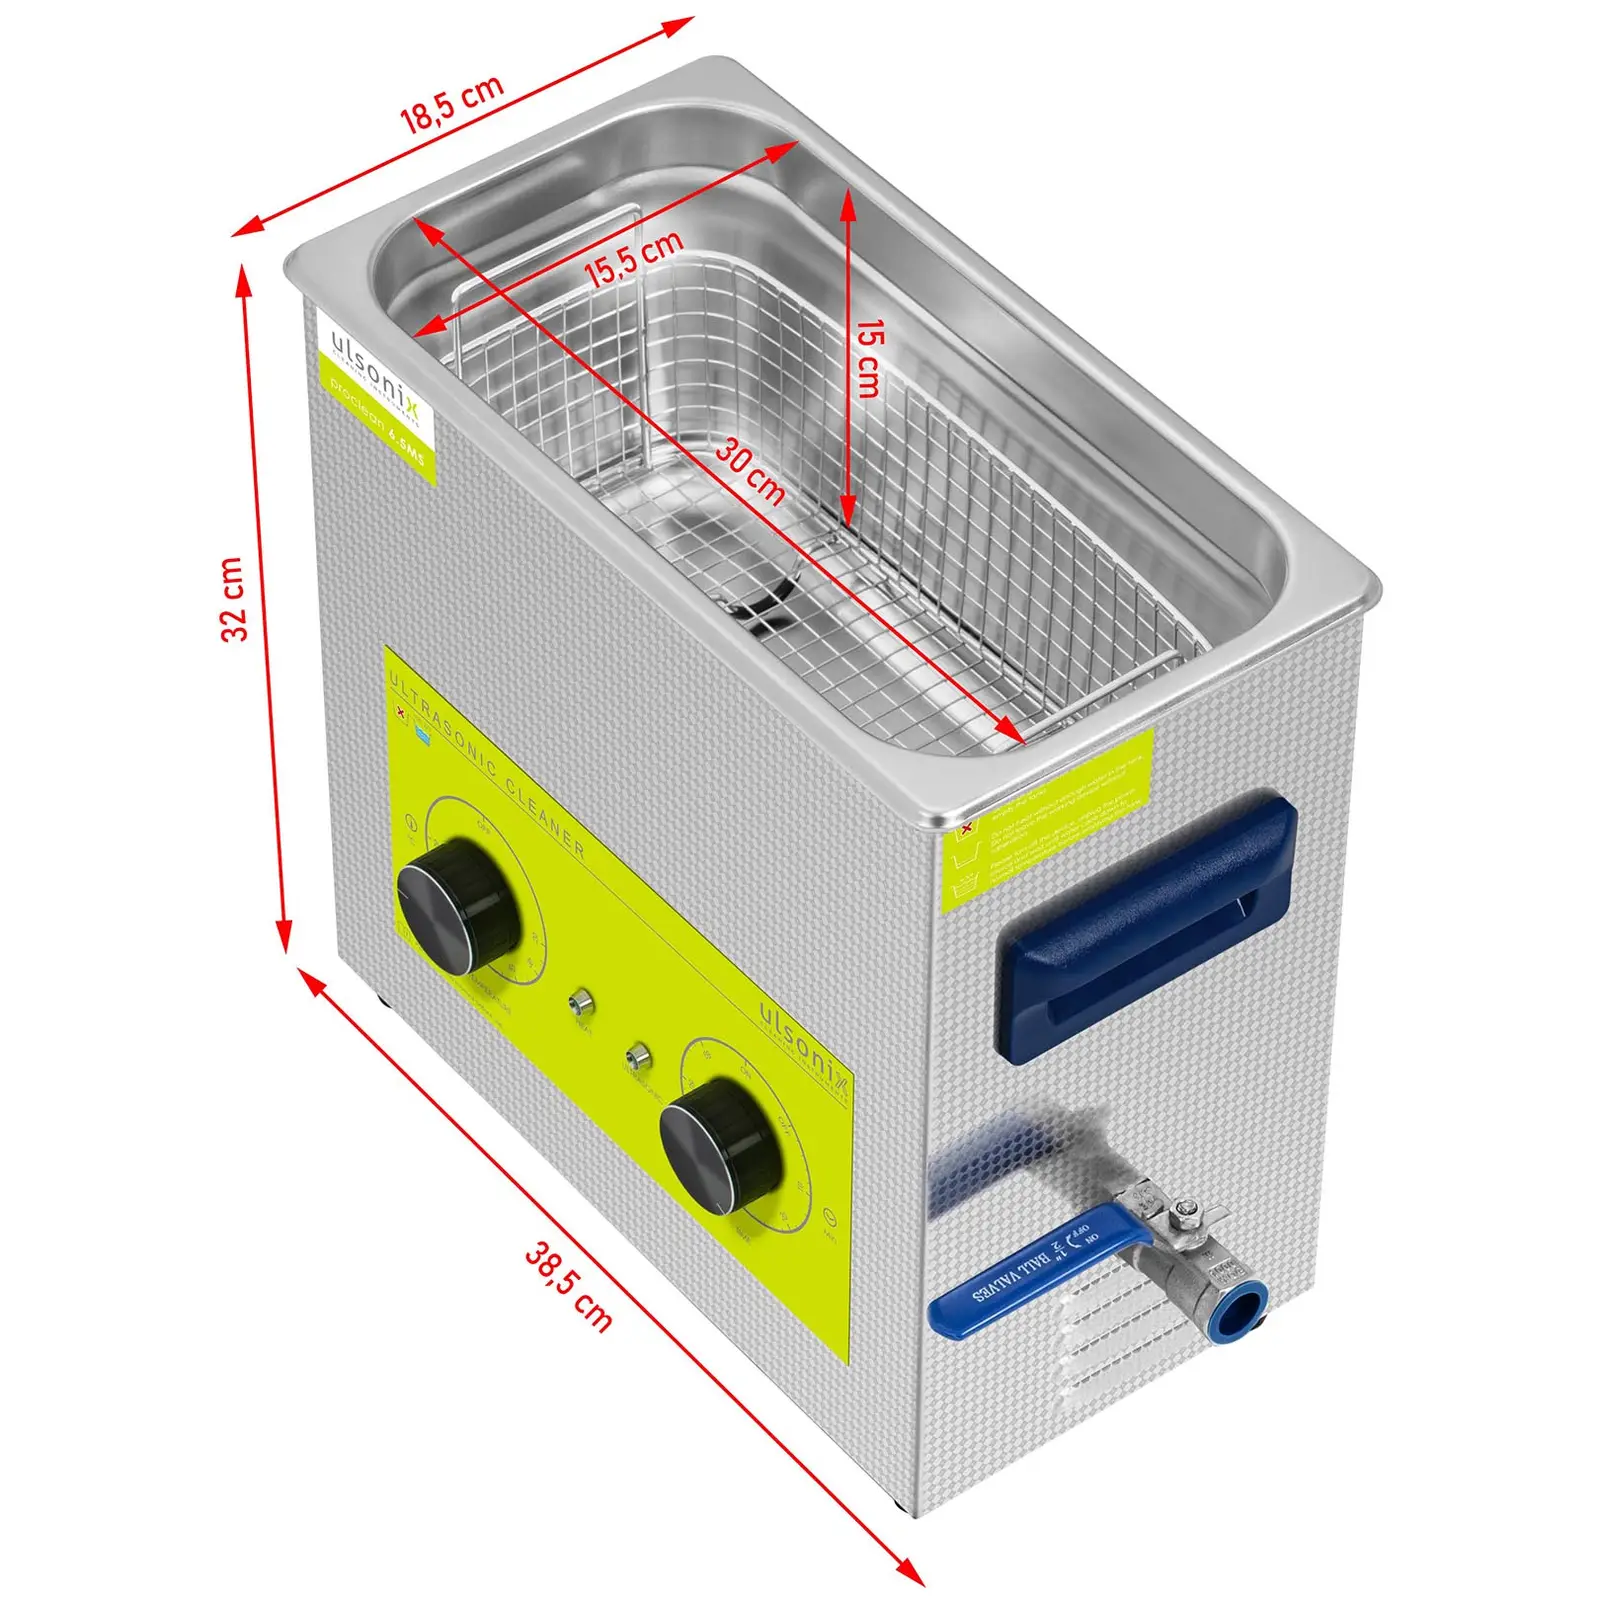 Ultrasonic Cleaner - 6.5 litres - 180 W